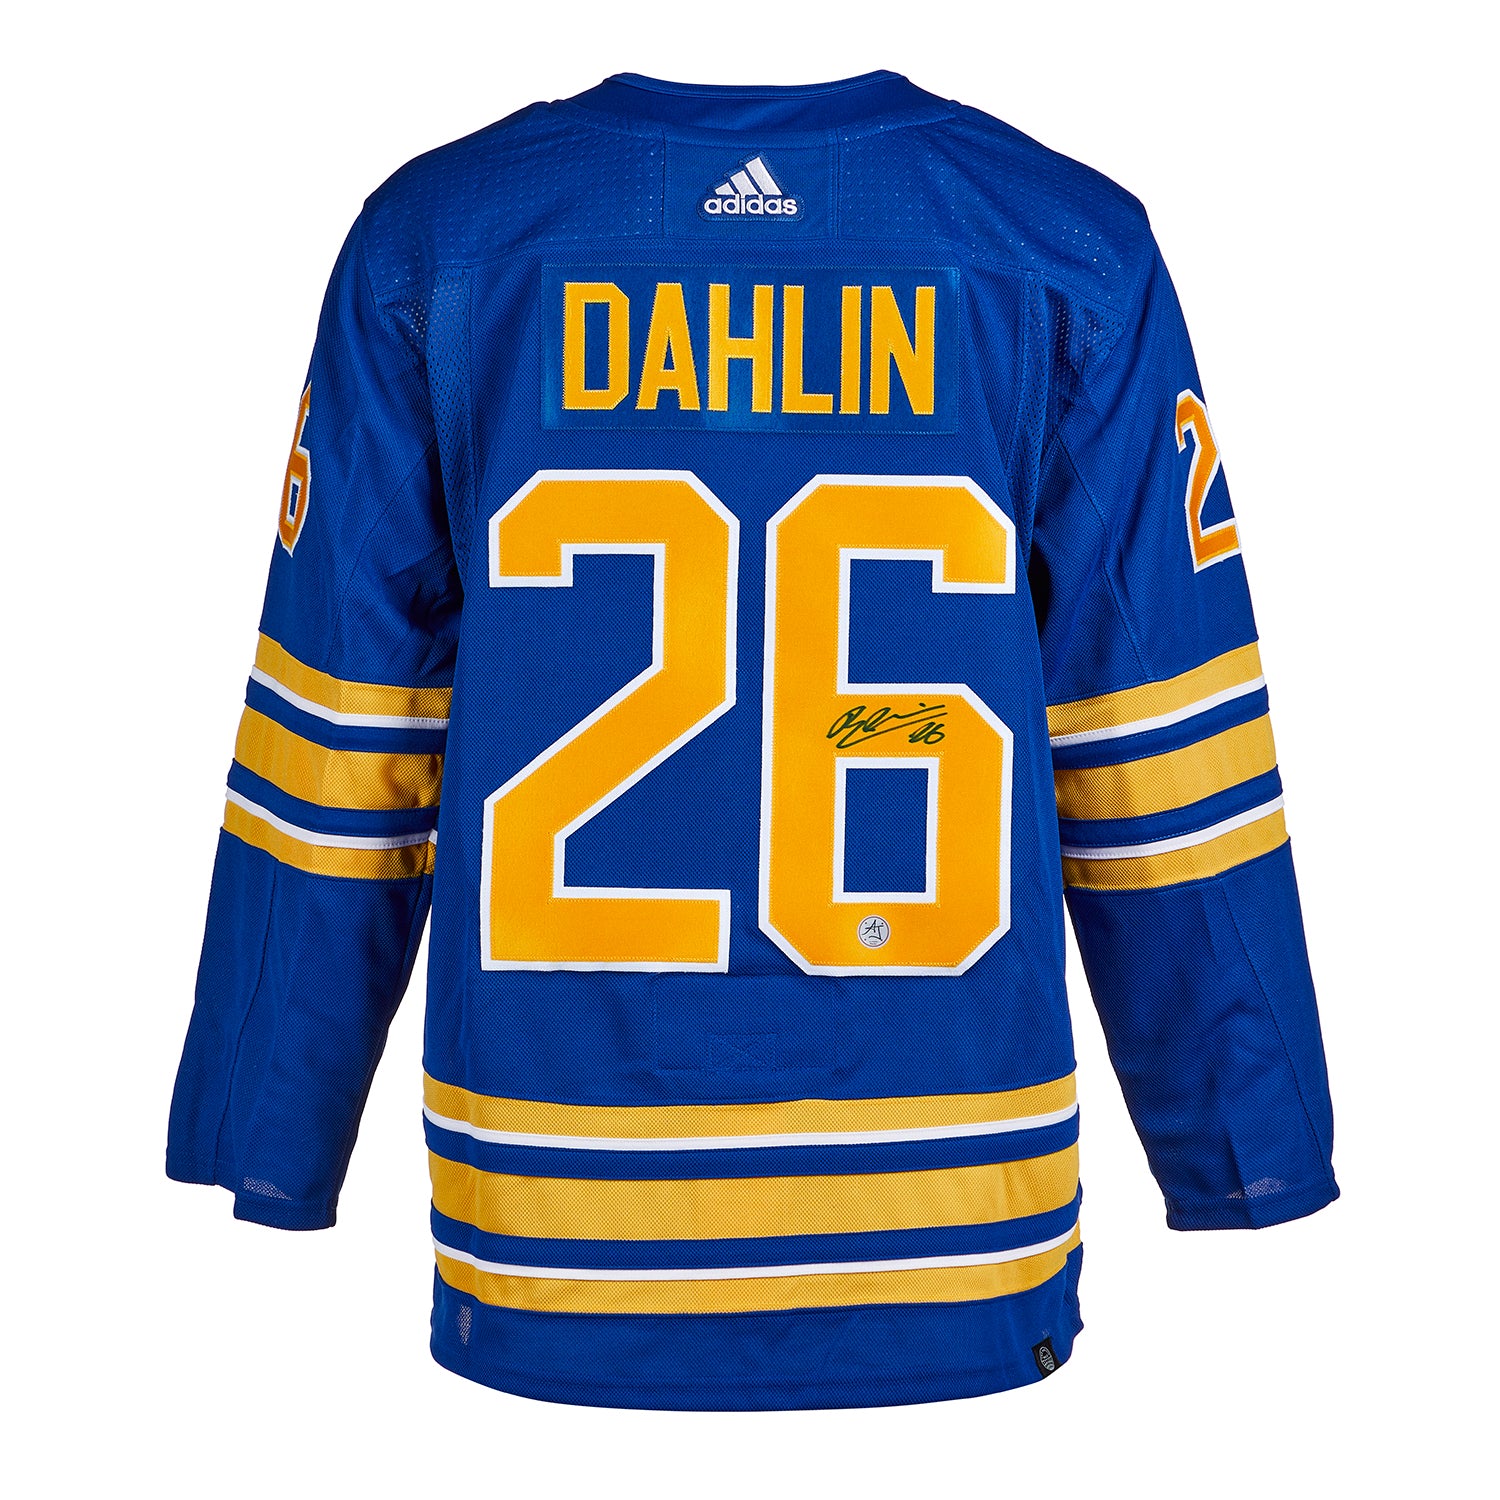 Rasmus Dahlin Sabres Goat Head Jersey for Sale in West Seneca, NY - OfferUp